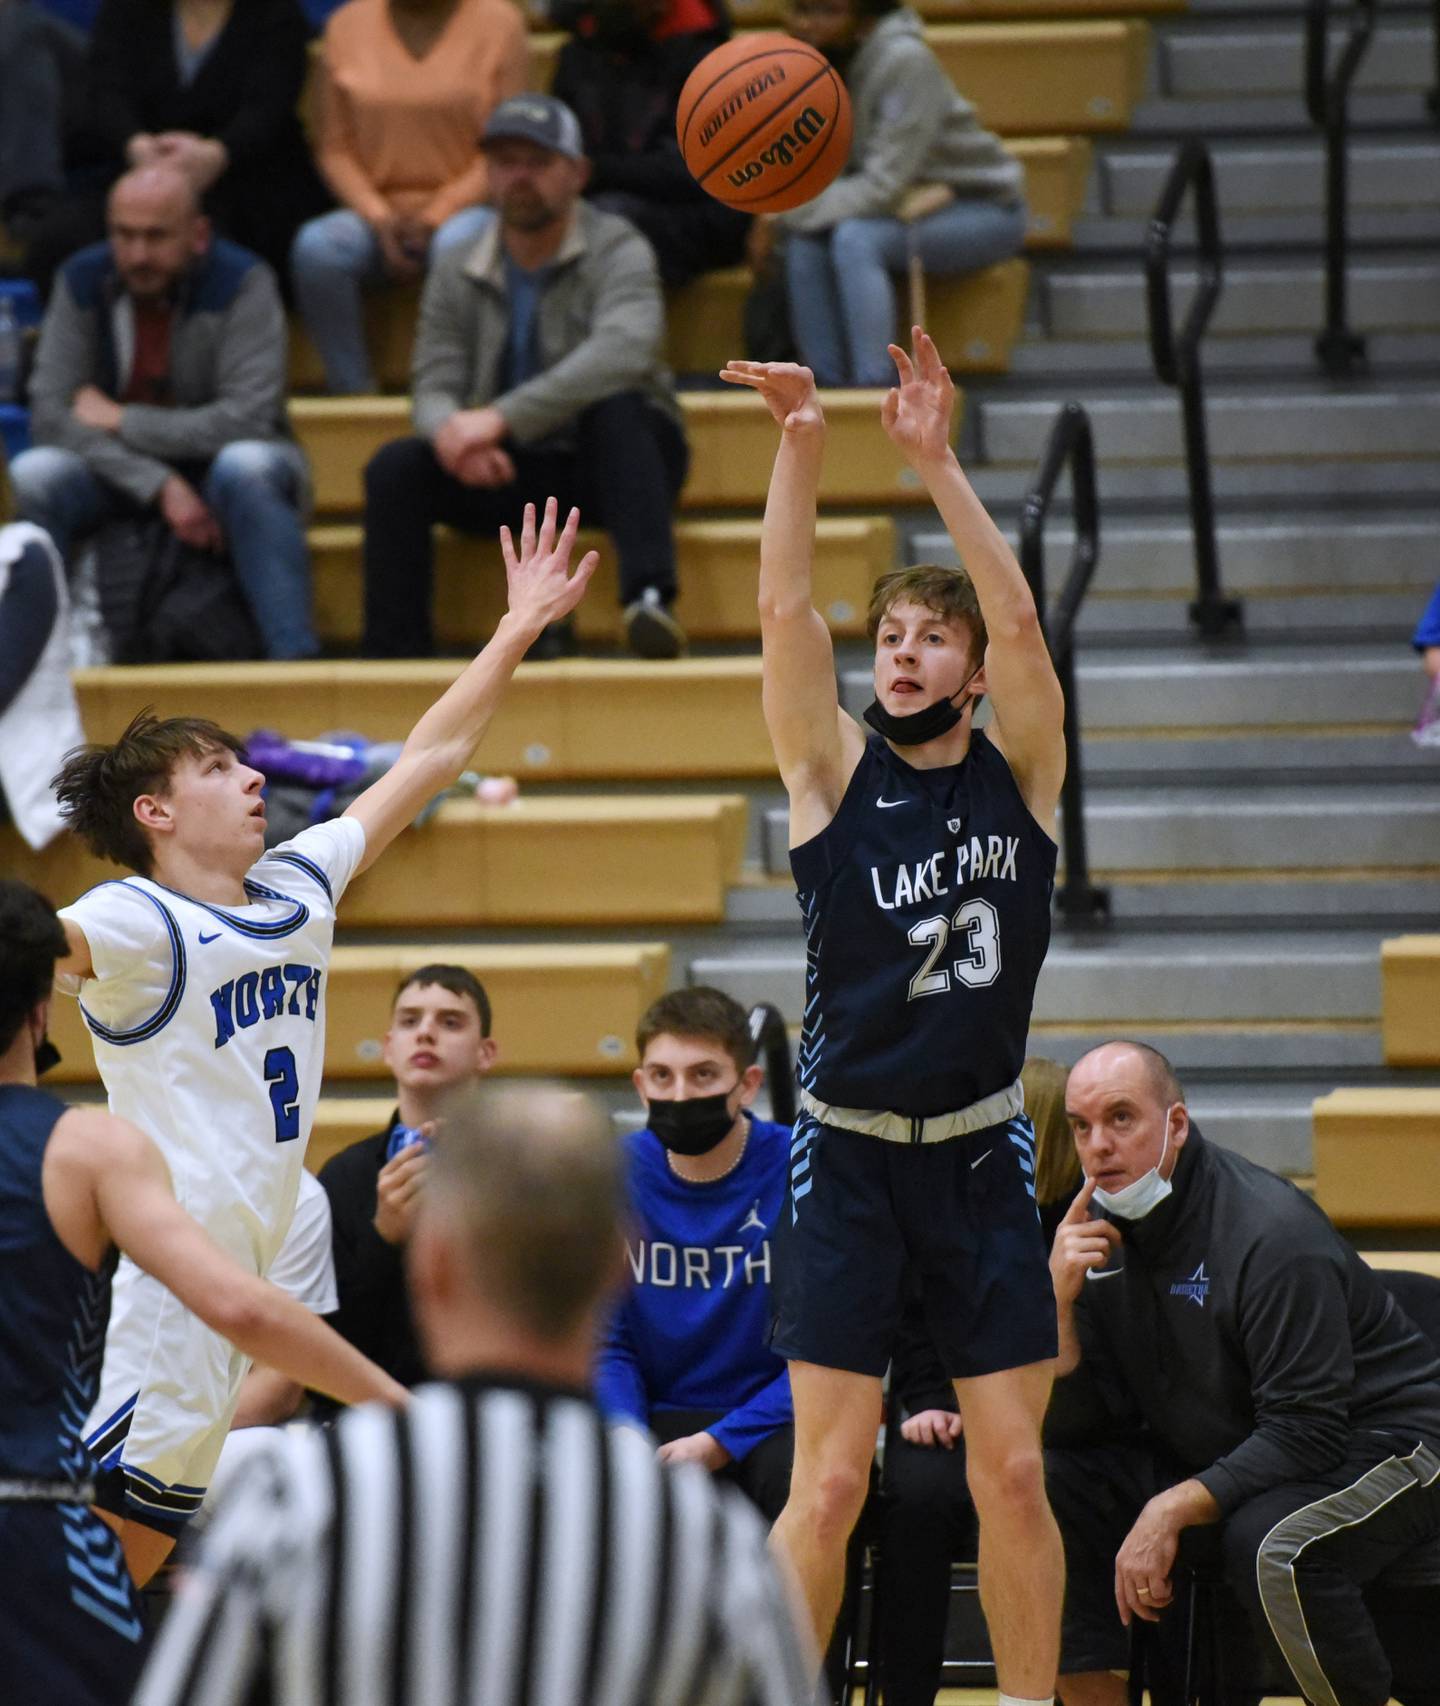 Lake Park's Matthew Zakic (23) takes a shot over St. Charles North's Mason Siegfried during Tuesday's boys basketball game in St. Charles.